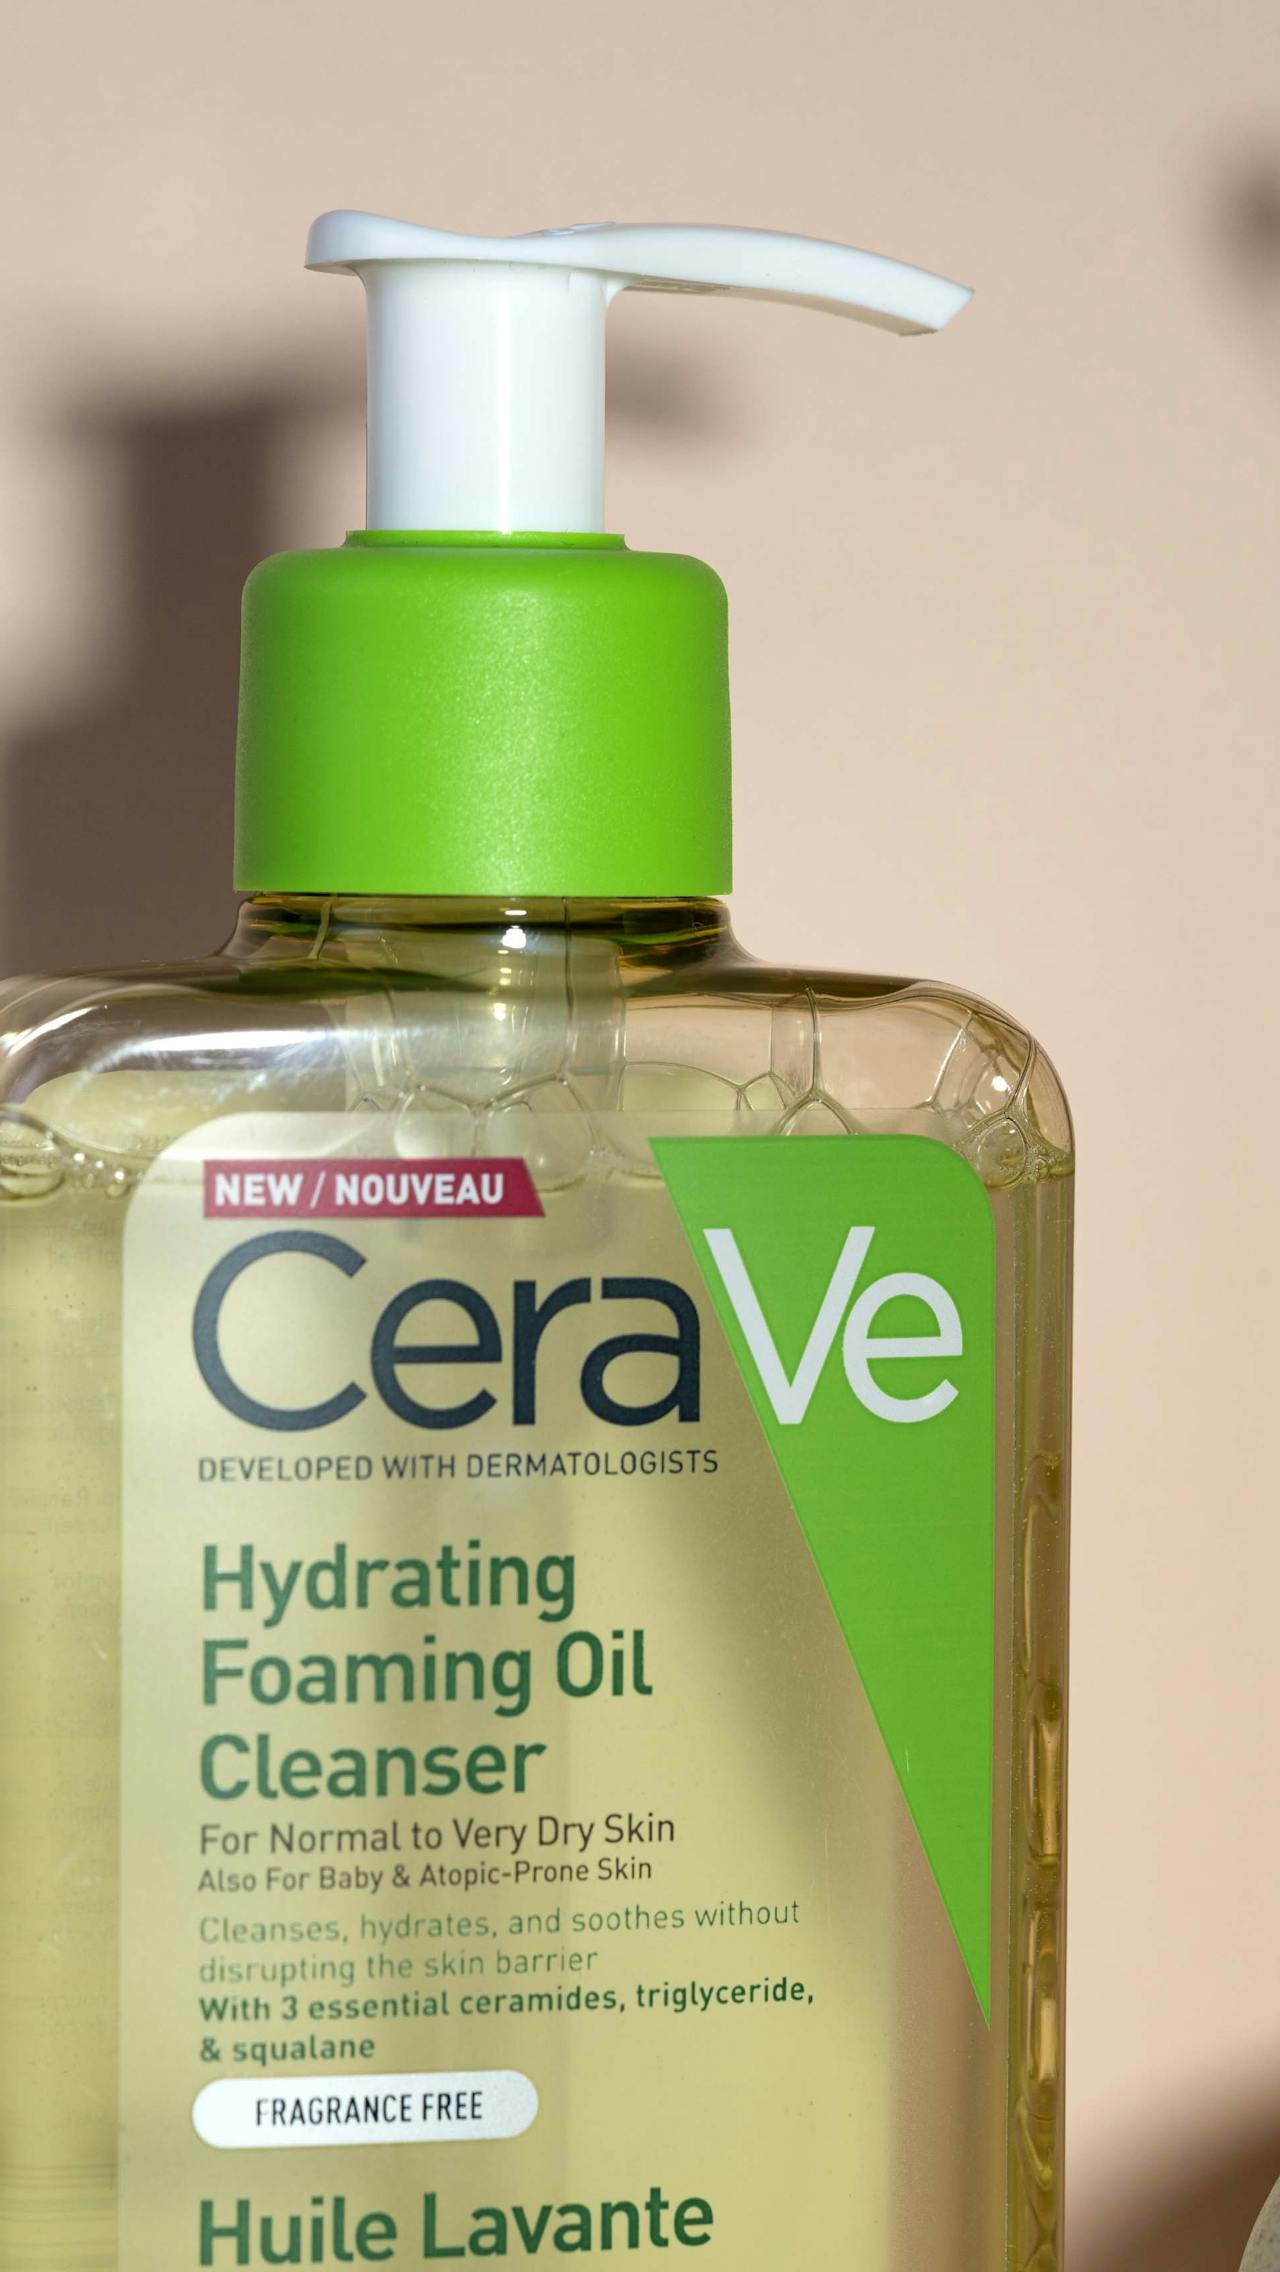 Is cerave cruelty free